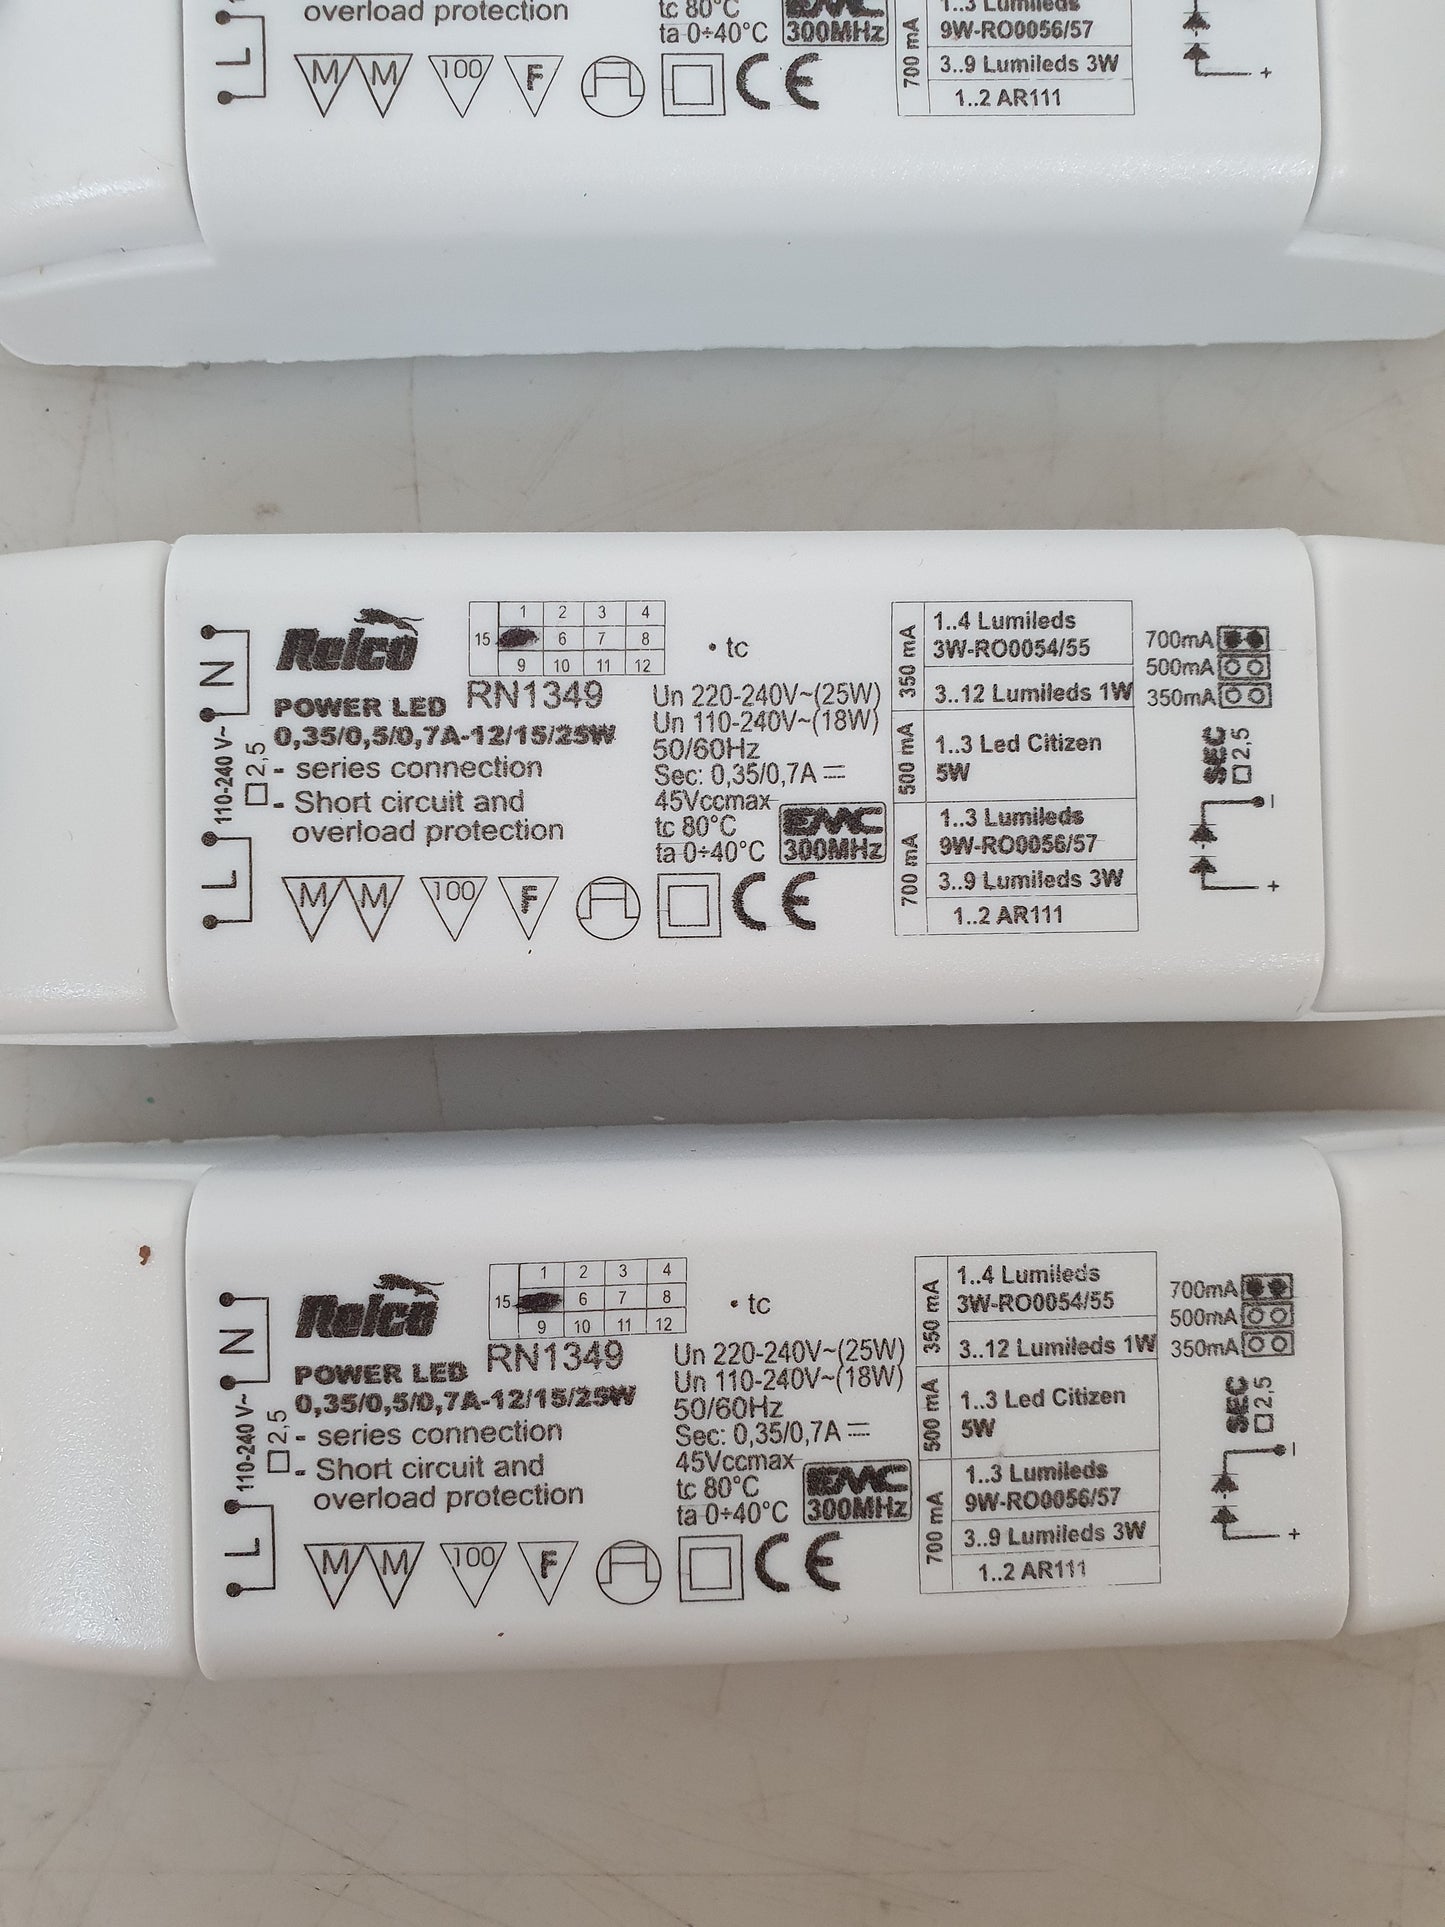 5 Power LED Relco RN1349